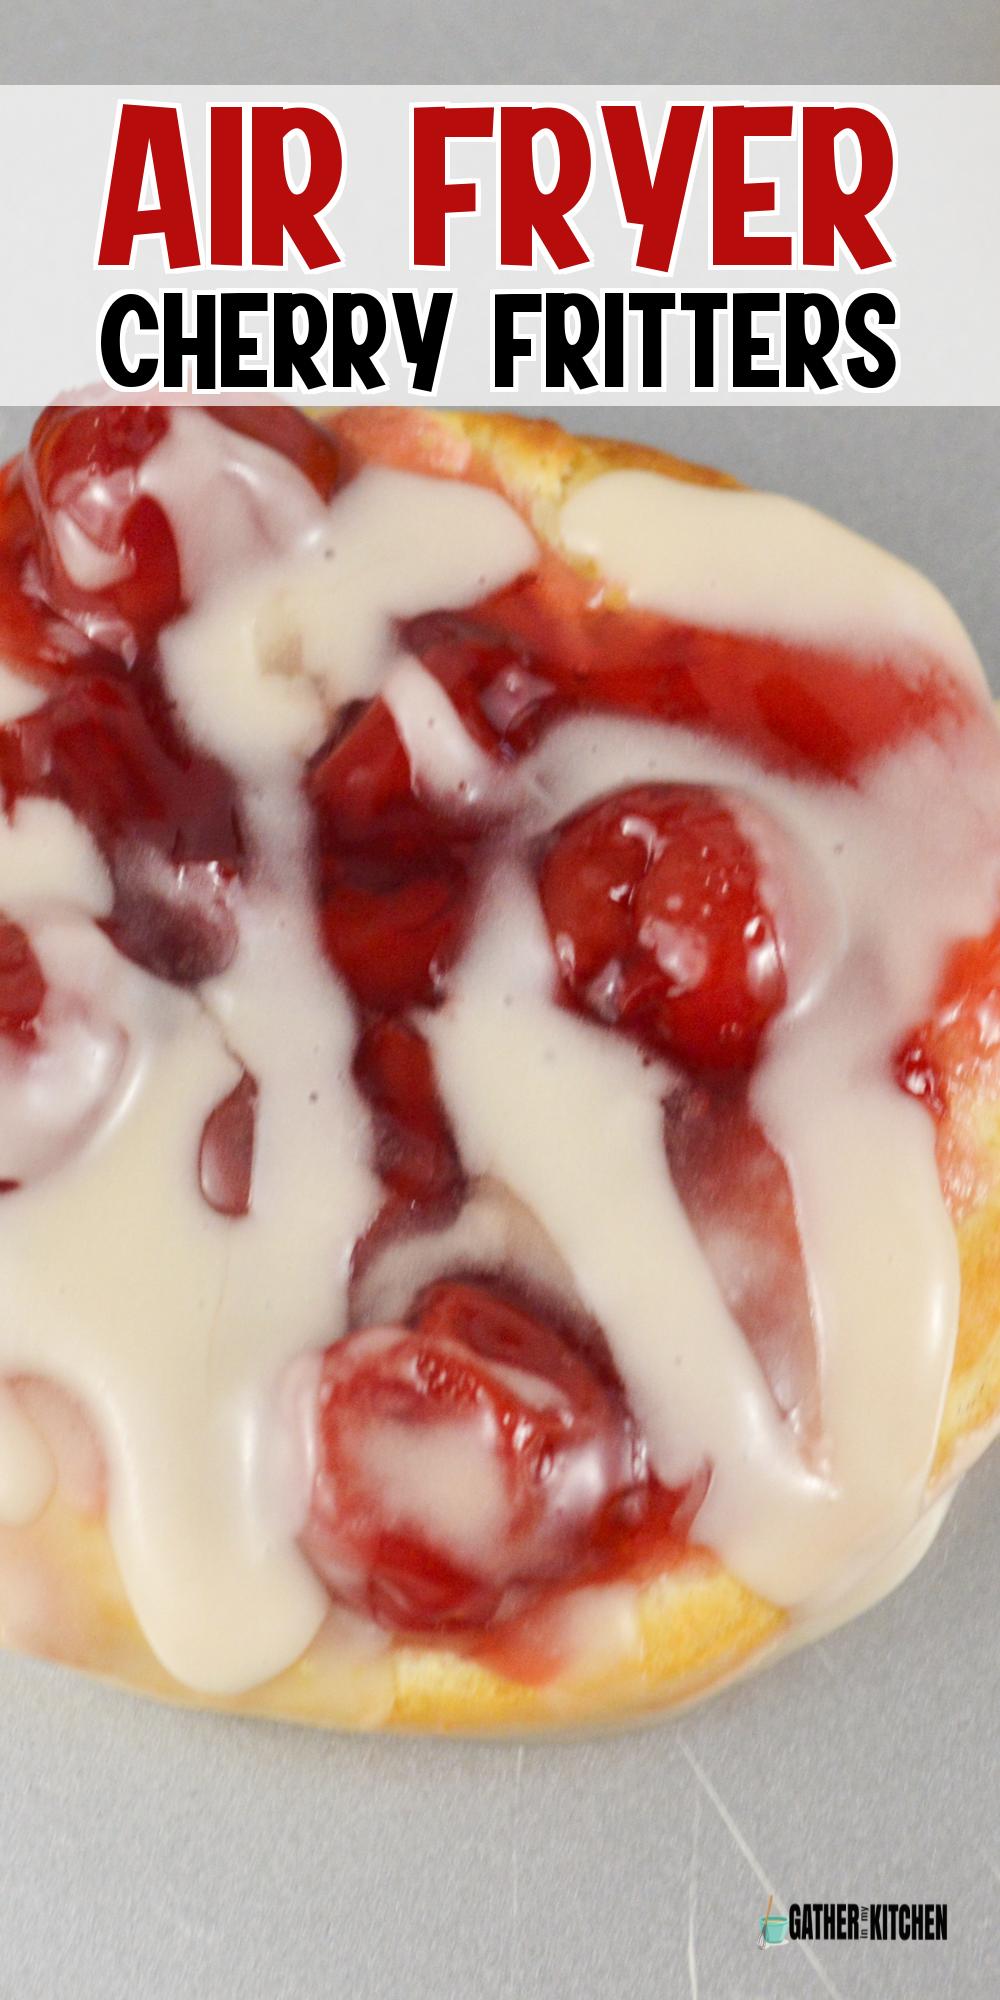 Pin image: top says "Air Fryer Cherry Fritters" and background is a closeup of an Air Fryer Cherry Fritter